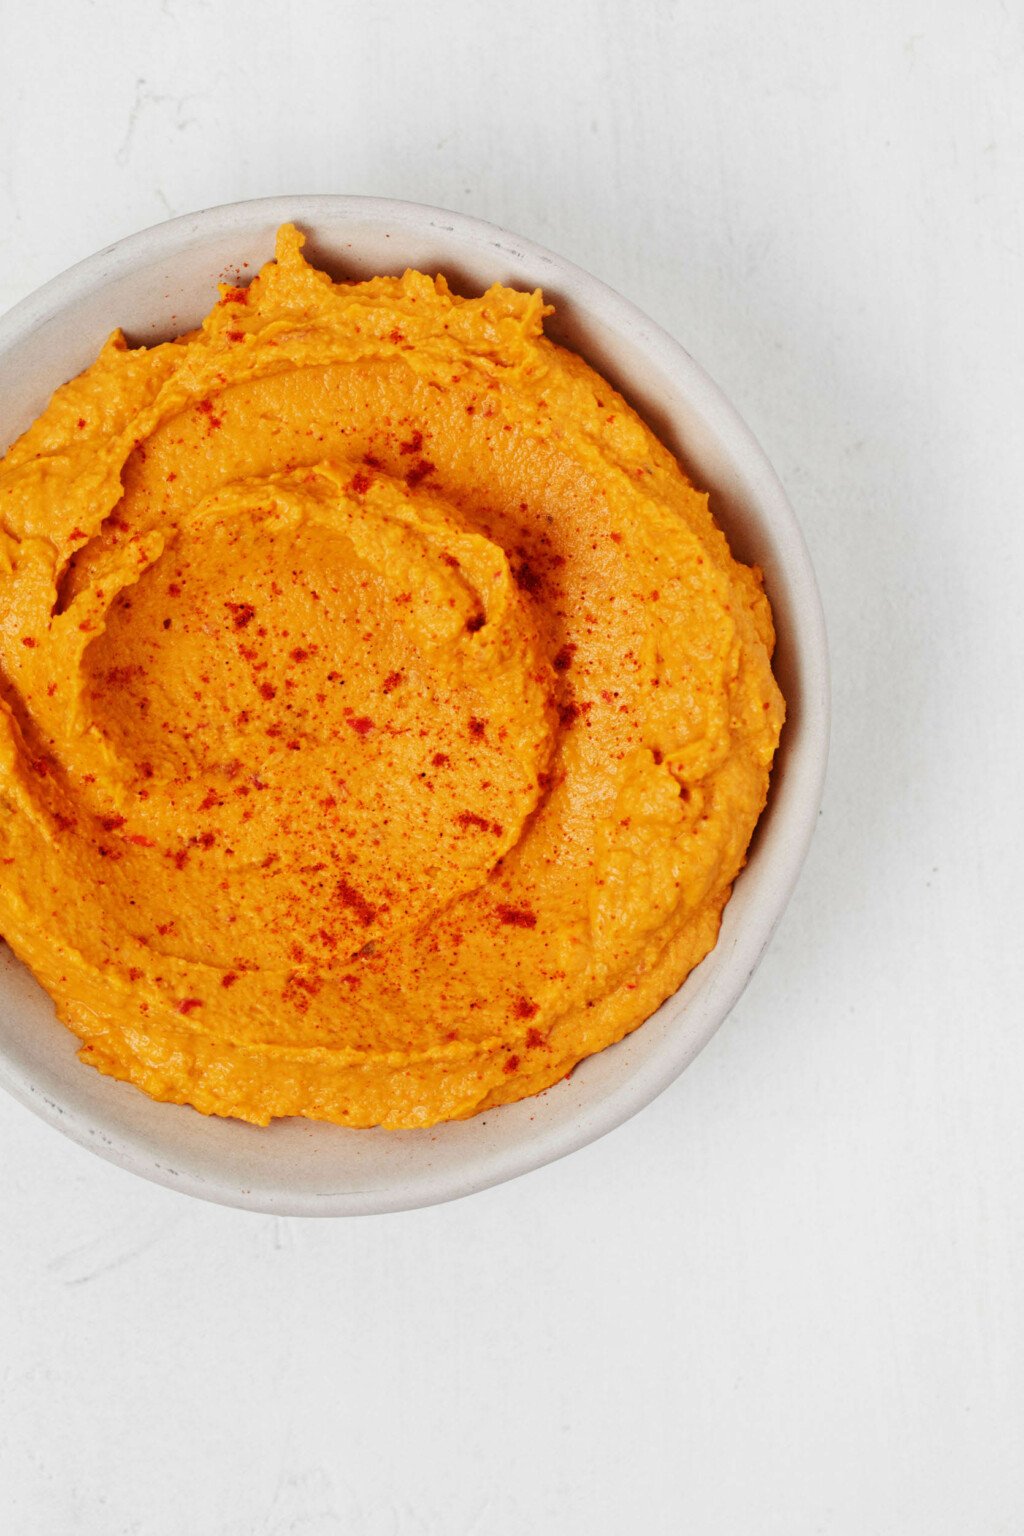 A swirled, vegan dip, which is made with sweet potatoes, is in a white bowl that rests on a white surface.